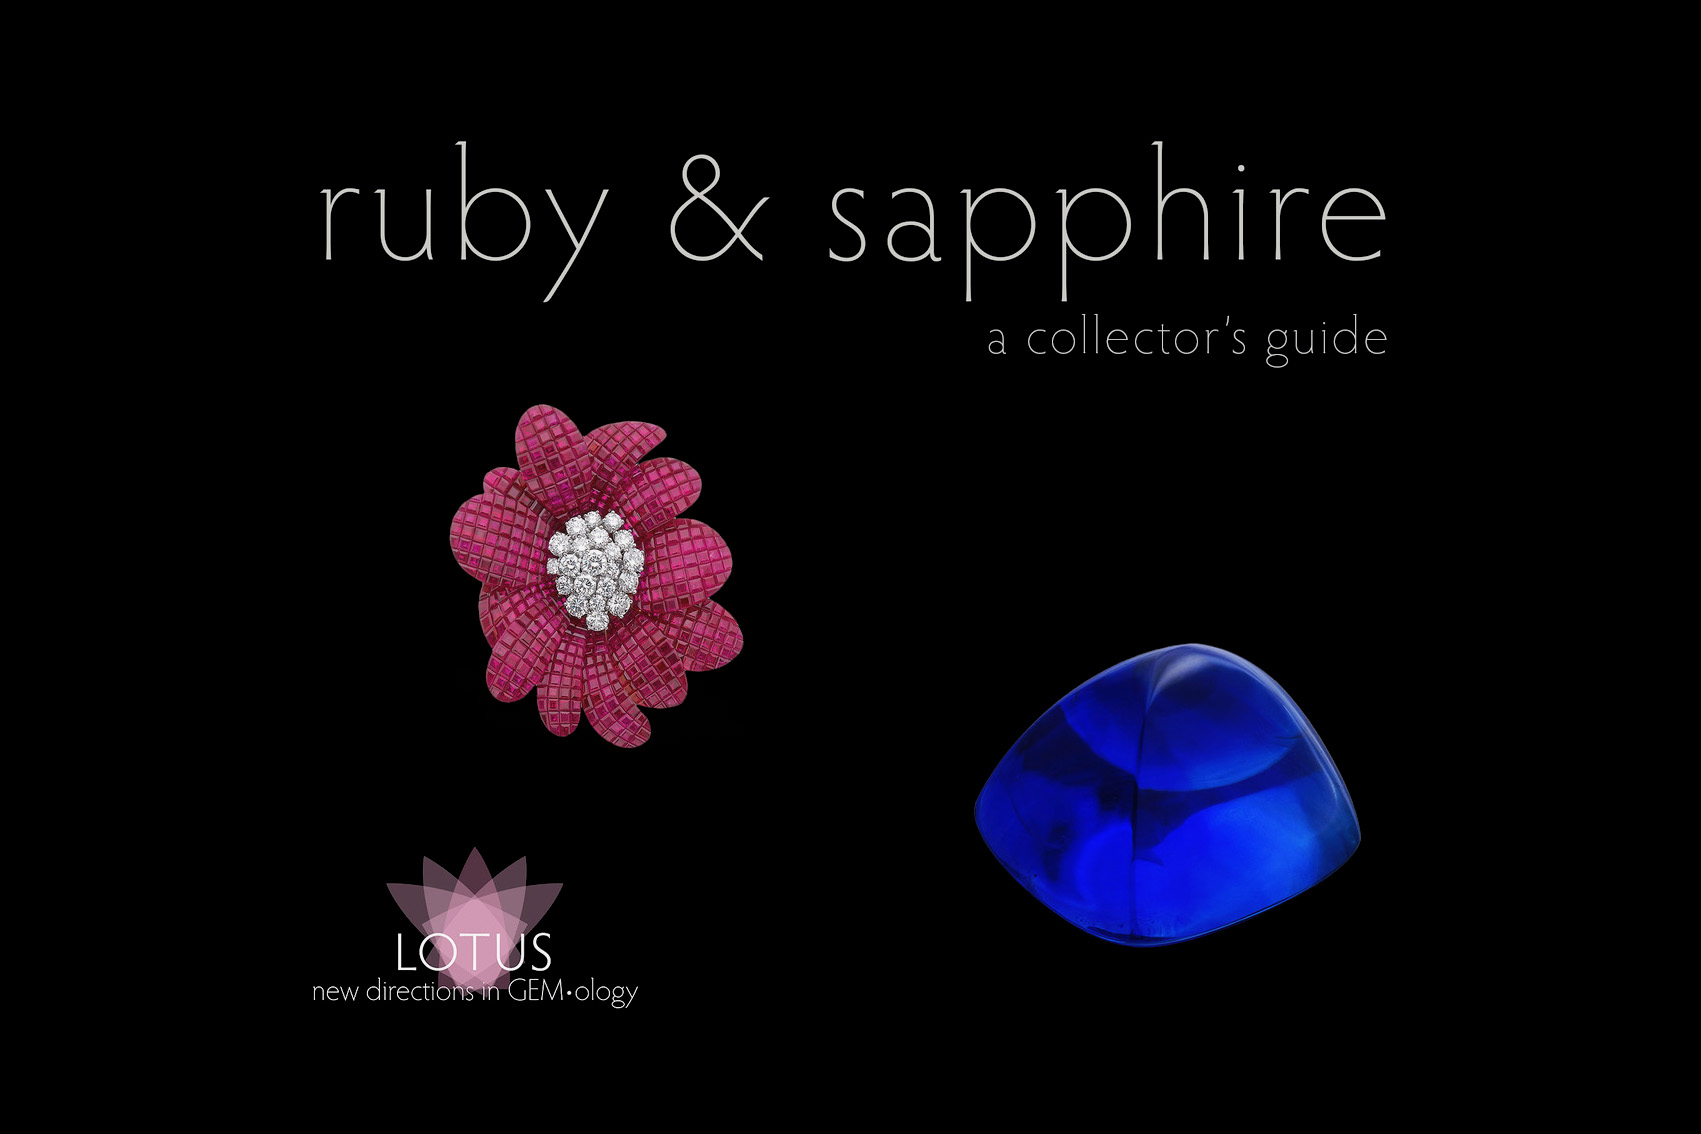 Ruby & Sapphire: A Collector's Guide